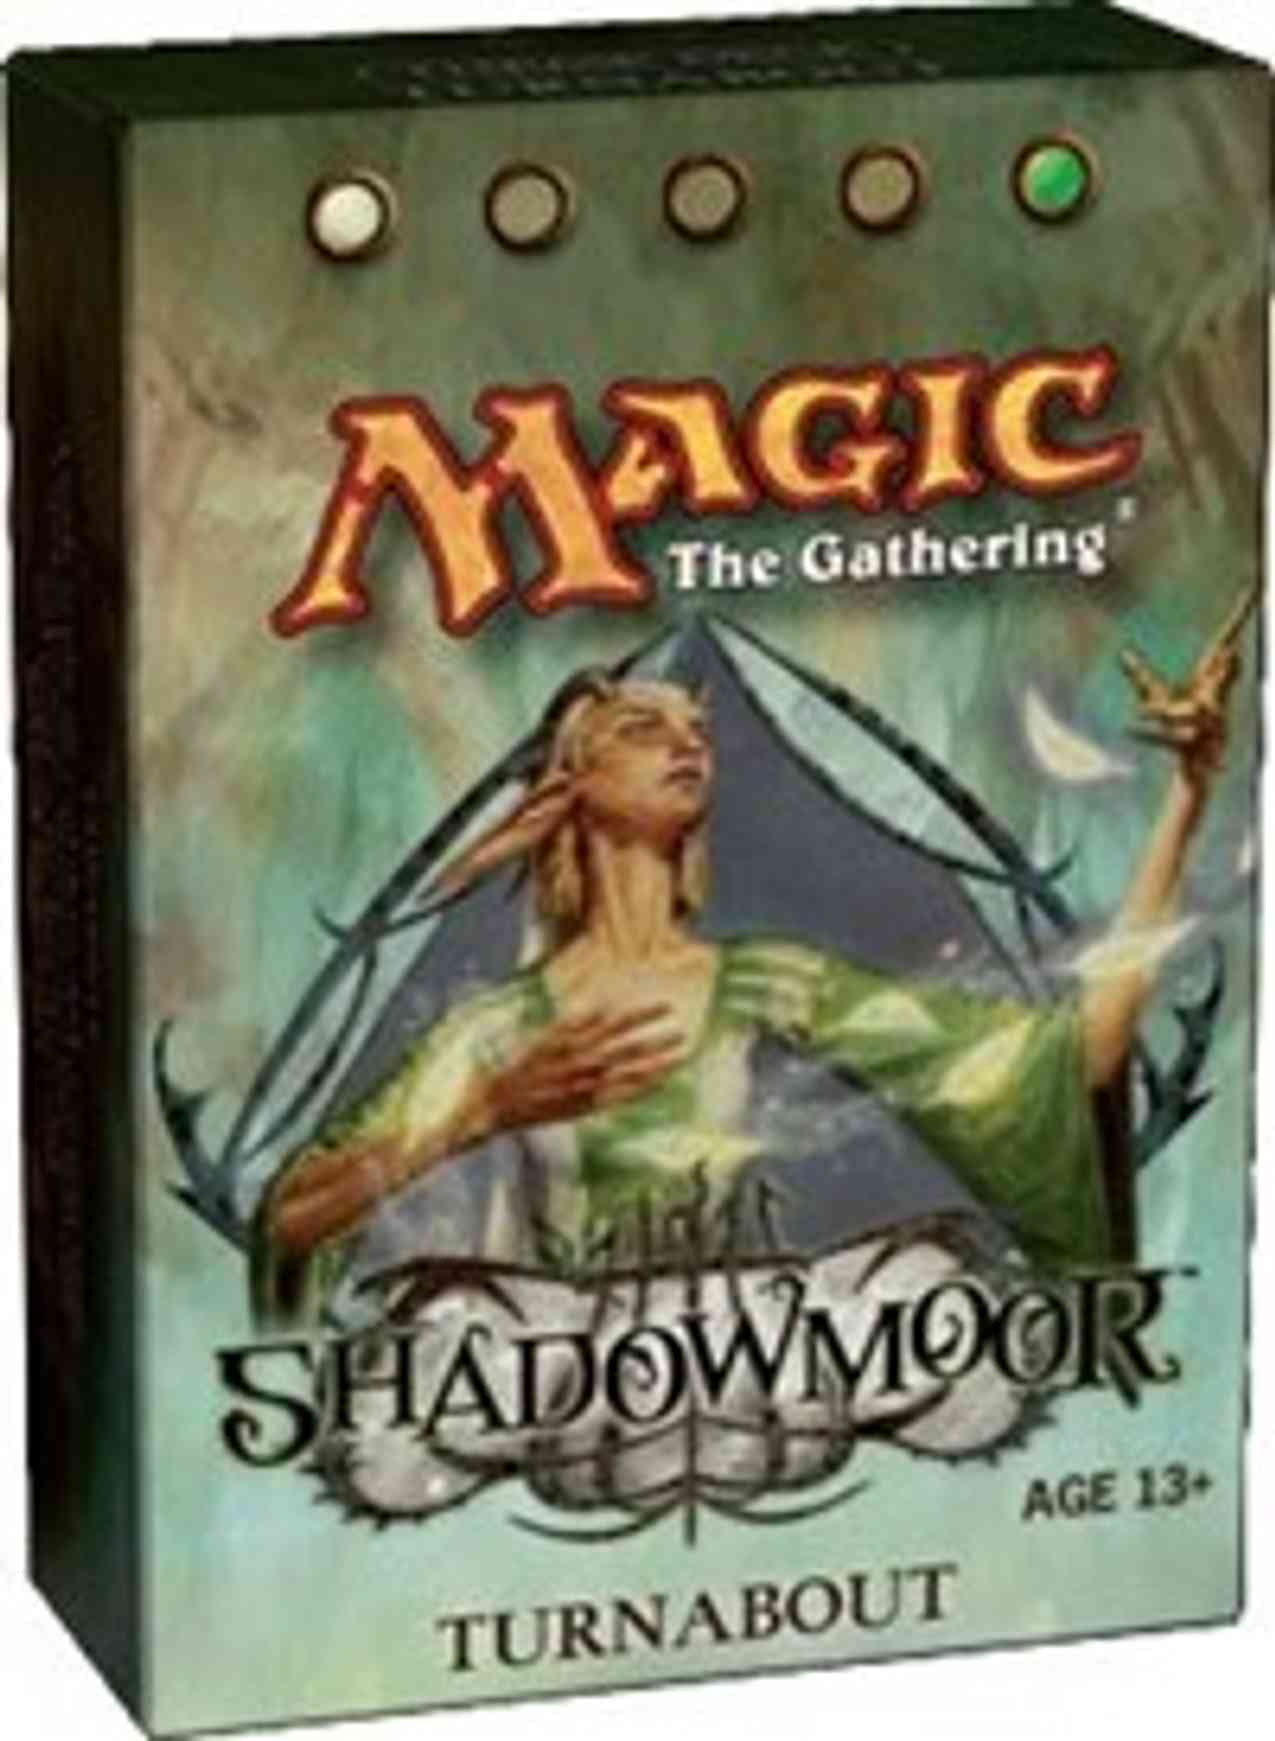 Shadowmoor Theme Deck - Turnabout magic card front